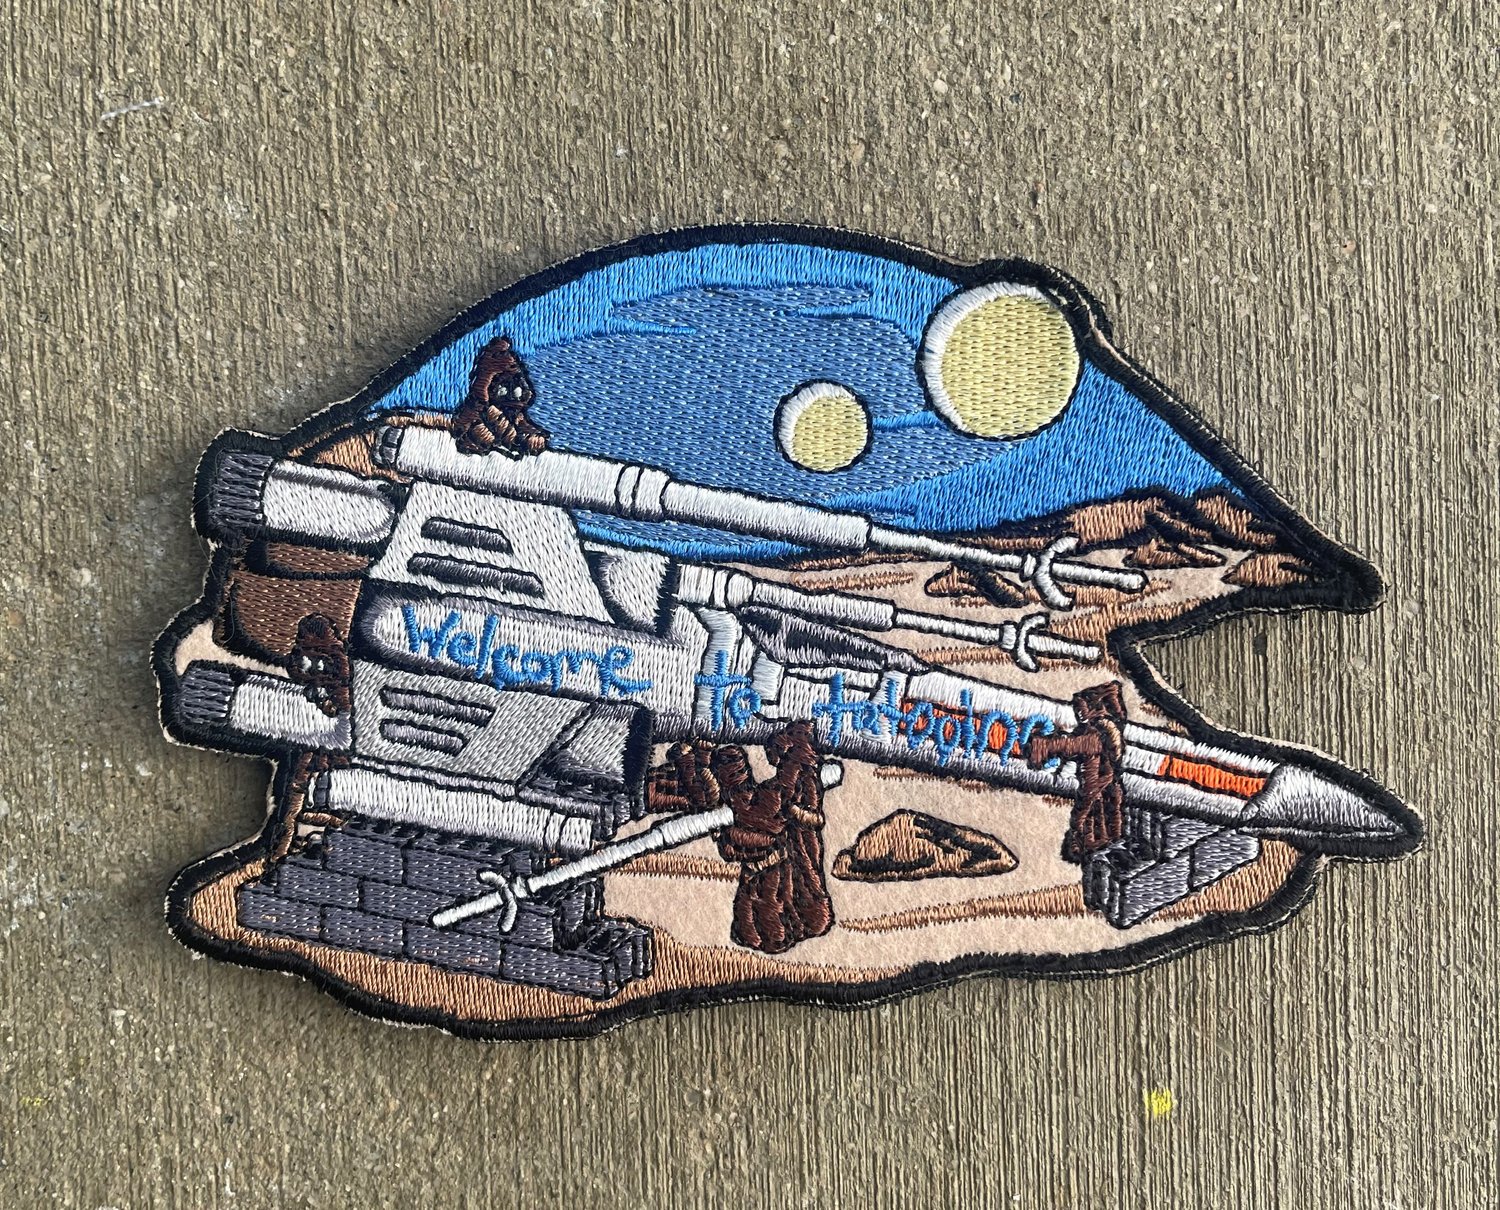 F.A.F.O. Embroidered Patch